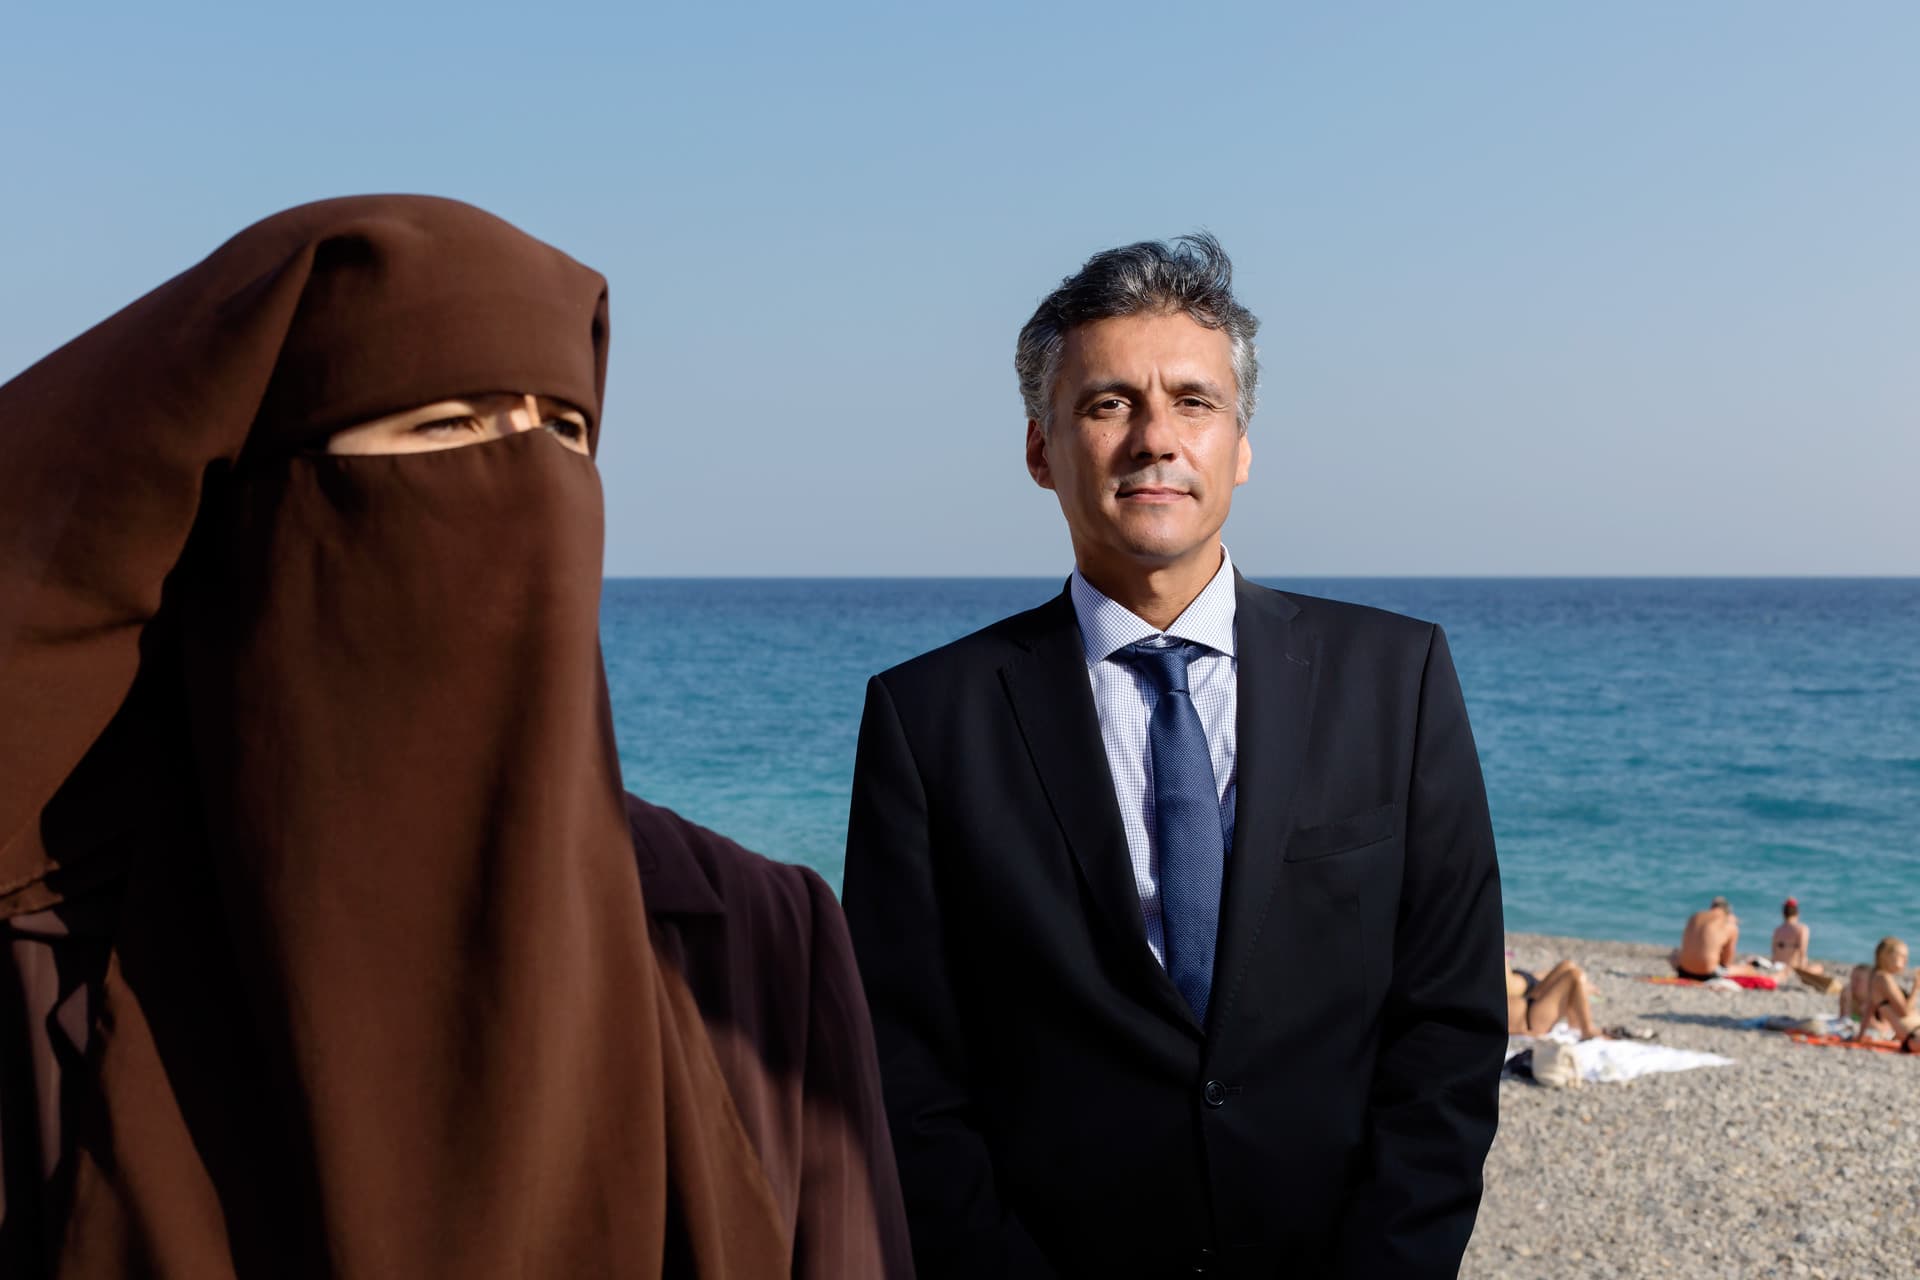 Woman wearing a niqab and man in a suit on a beach in the sunshine